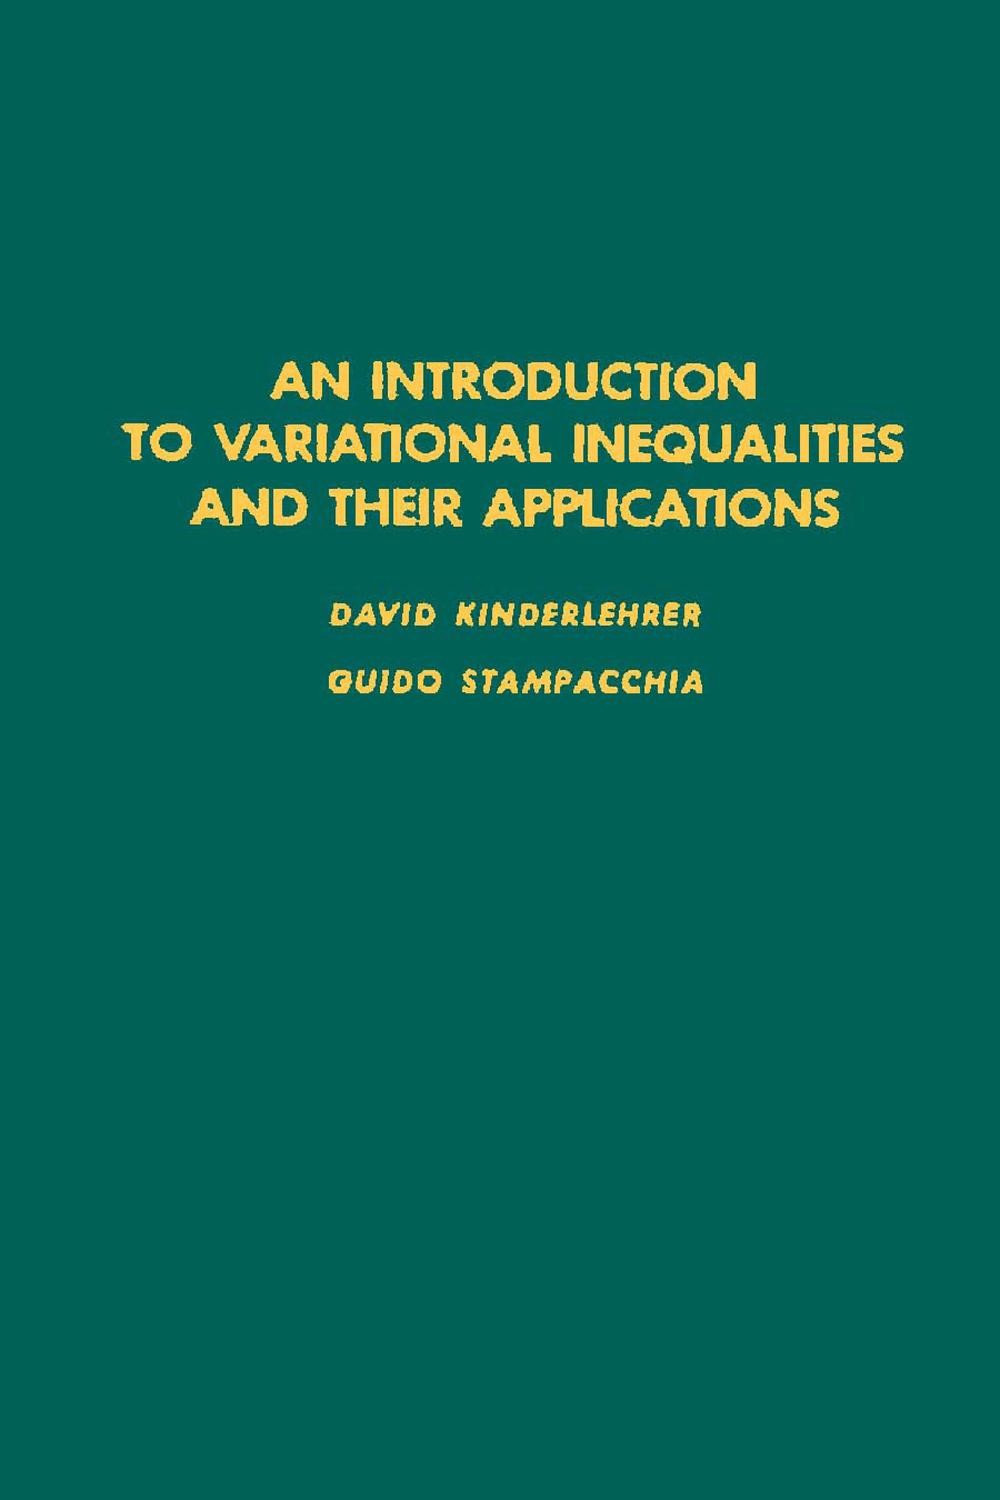 An Introduction to Variational Inequalities and Their Applications, Volume 88